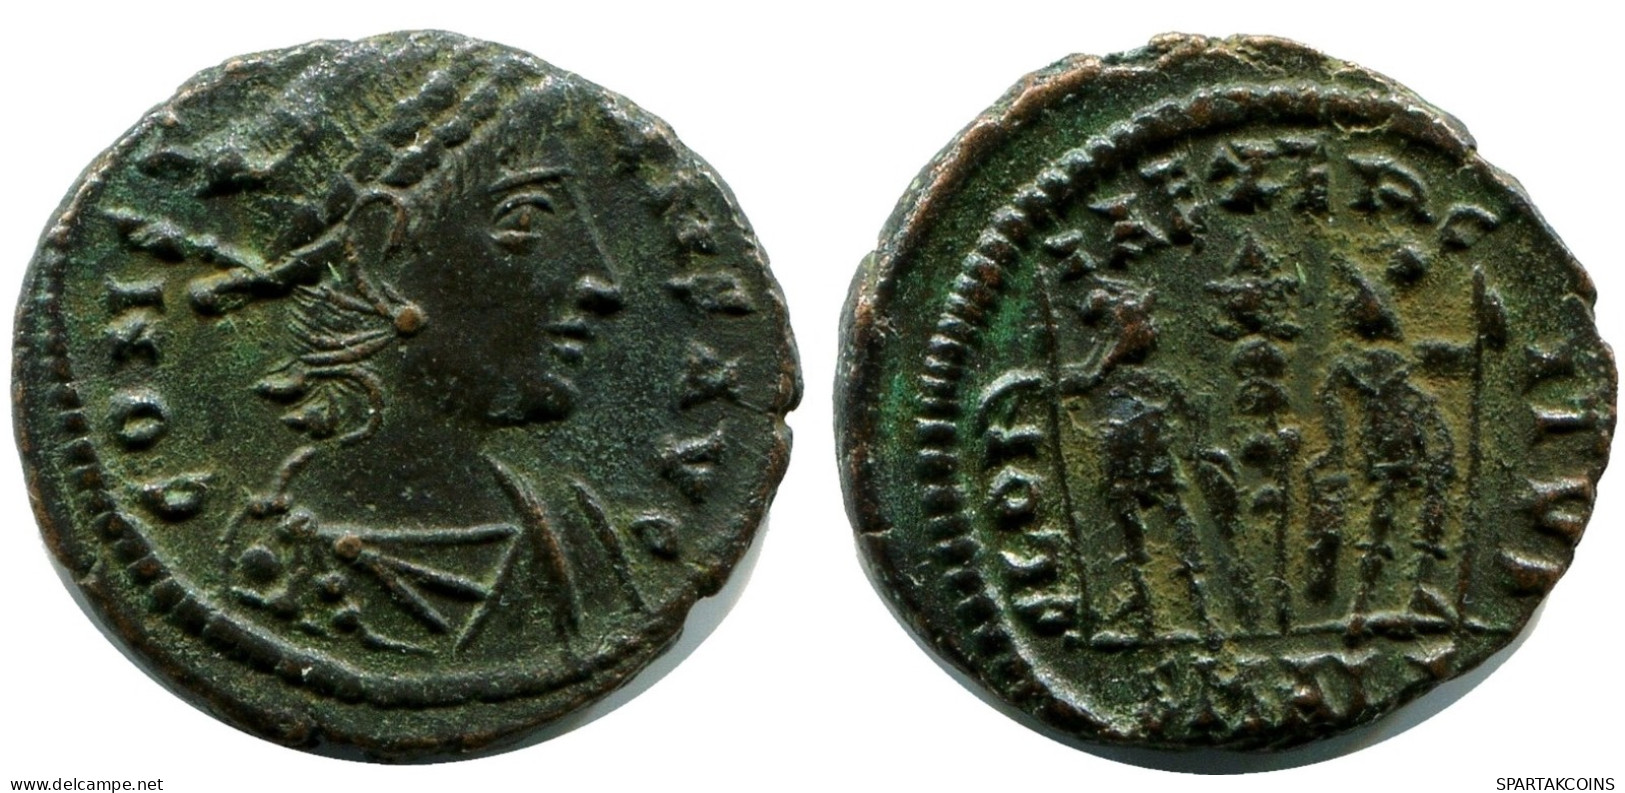 CONSTANS MINTED IN ALEKSANDRIA FOUND IN IHNASYAH HOARD EGYPT #ANC11360.14.D.A - El Imperio Christiano (307 / 363)